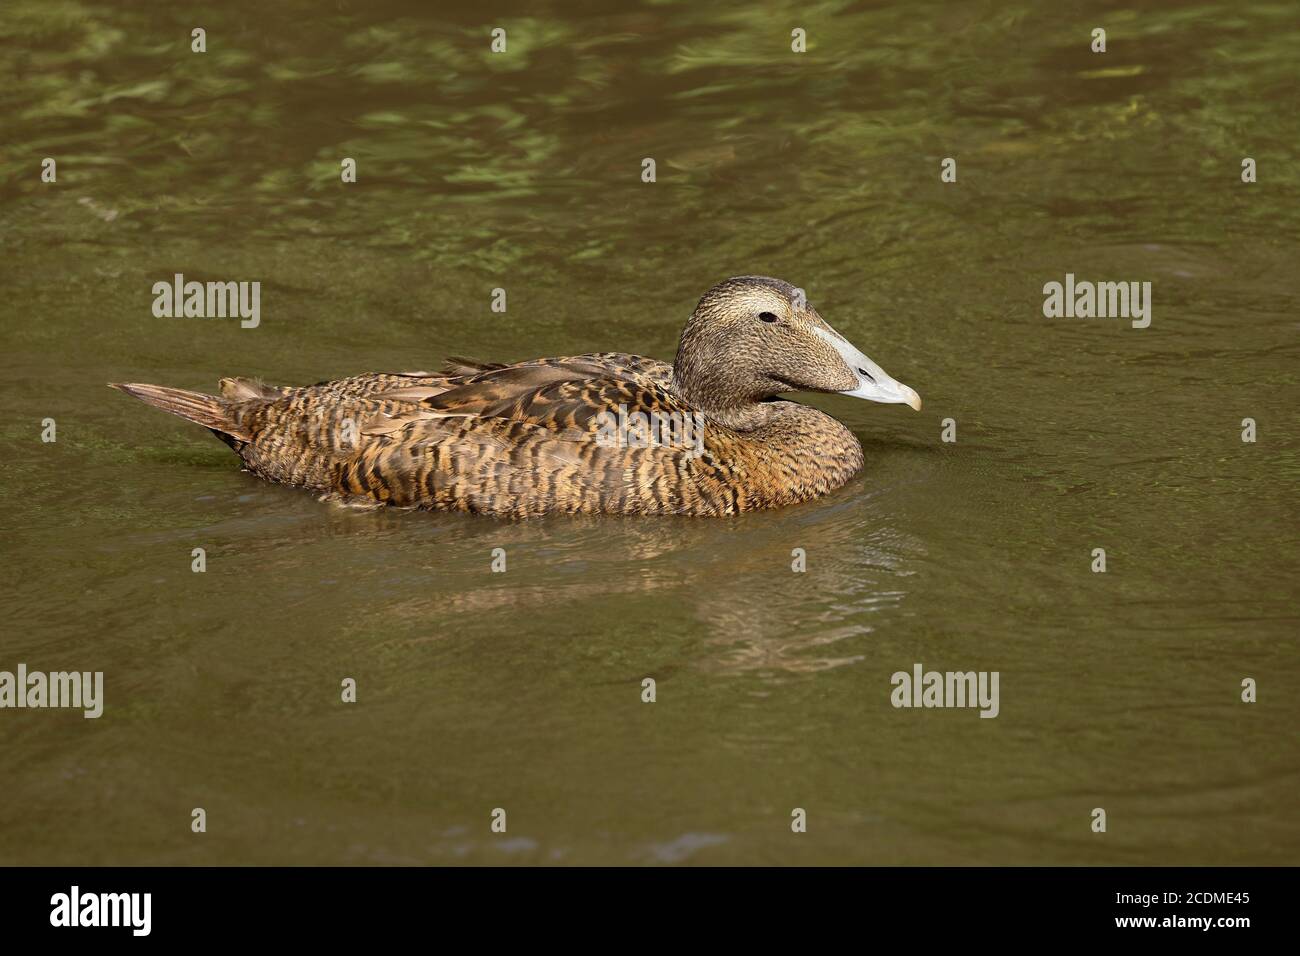 Common eider (Somateria mollissima ), Female swimming on a water body, Hesse, Germany Stock Photo